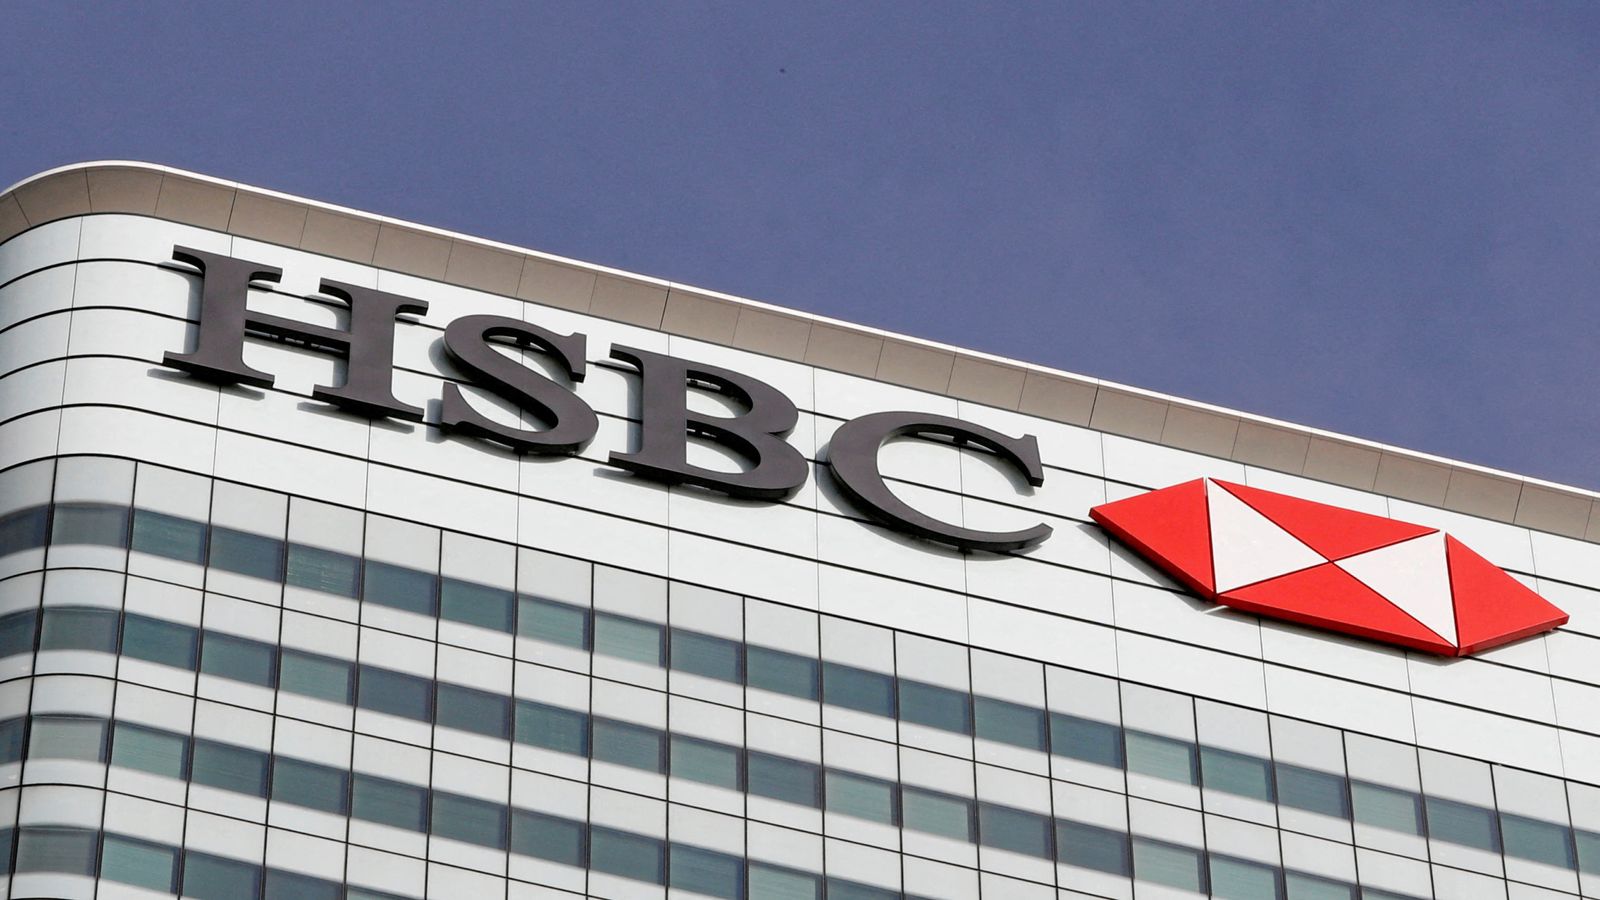 HSBC head dismisses idea China is trying to get hold of the bank's Asian operations